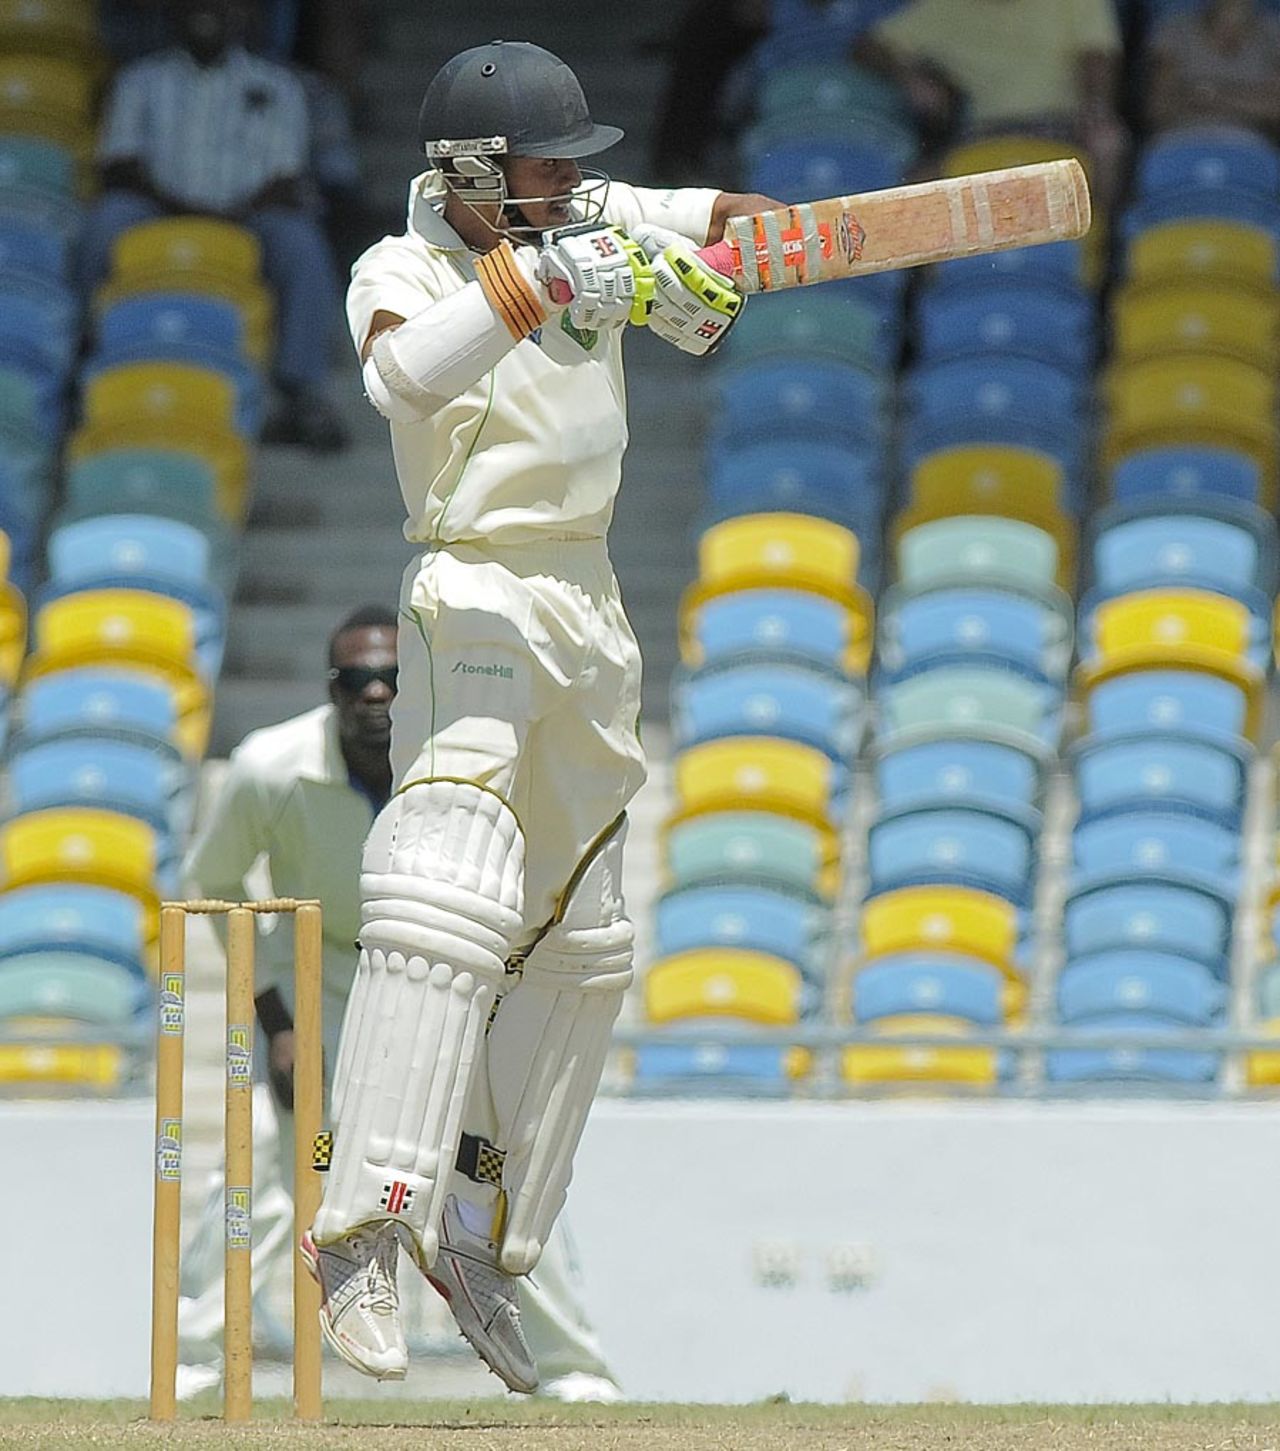 Tagenarine Chanderpaul cuts, Barbados v Guyana, Regional Four Day Competition, 2nd day, Barbados, February 16, 2013